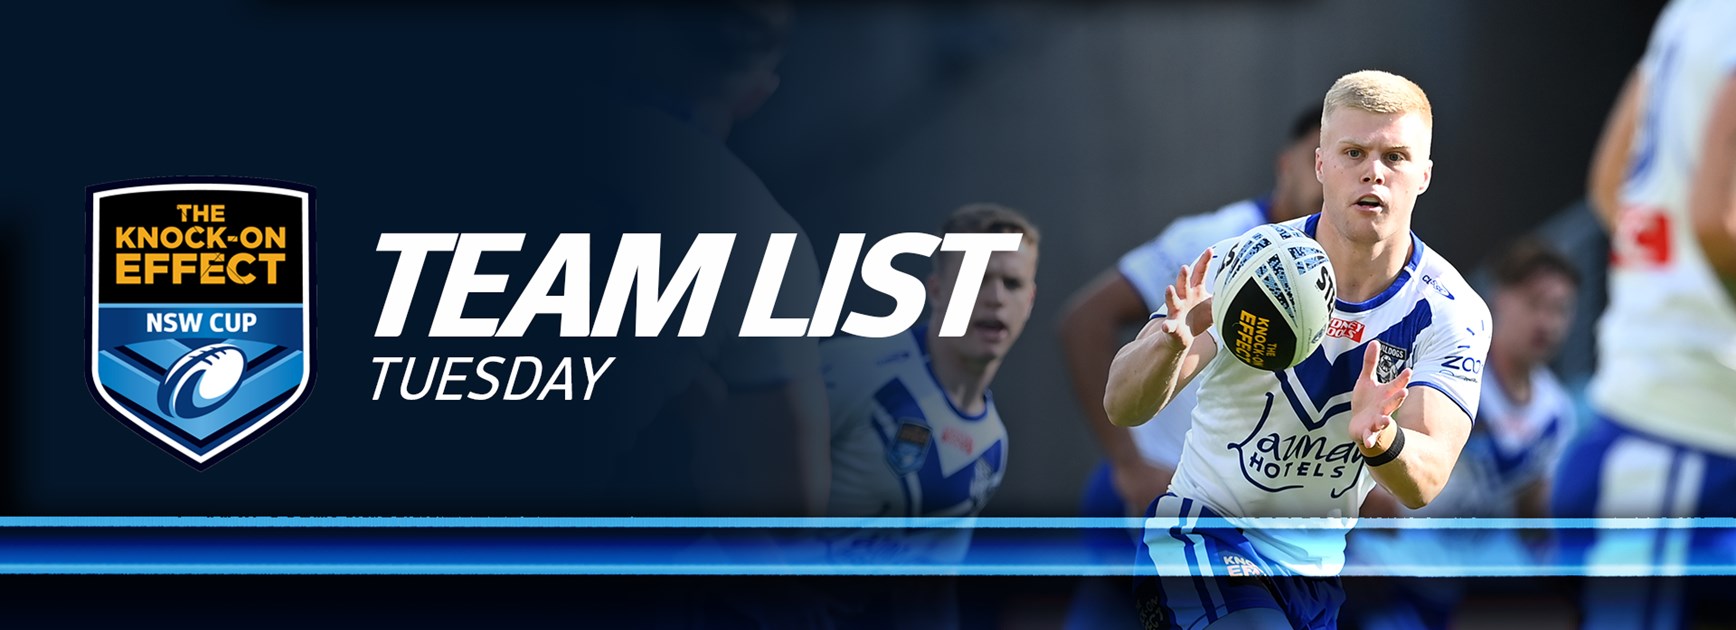 Team List Tuesday | The Knock-On Effect NSW Cup - Round 20